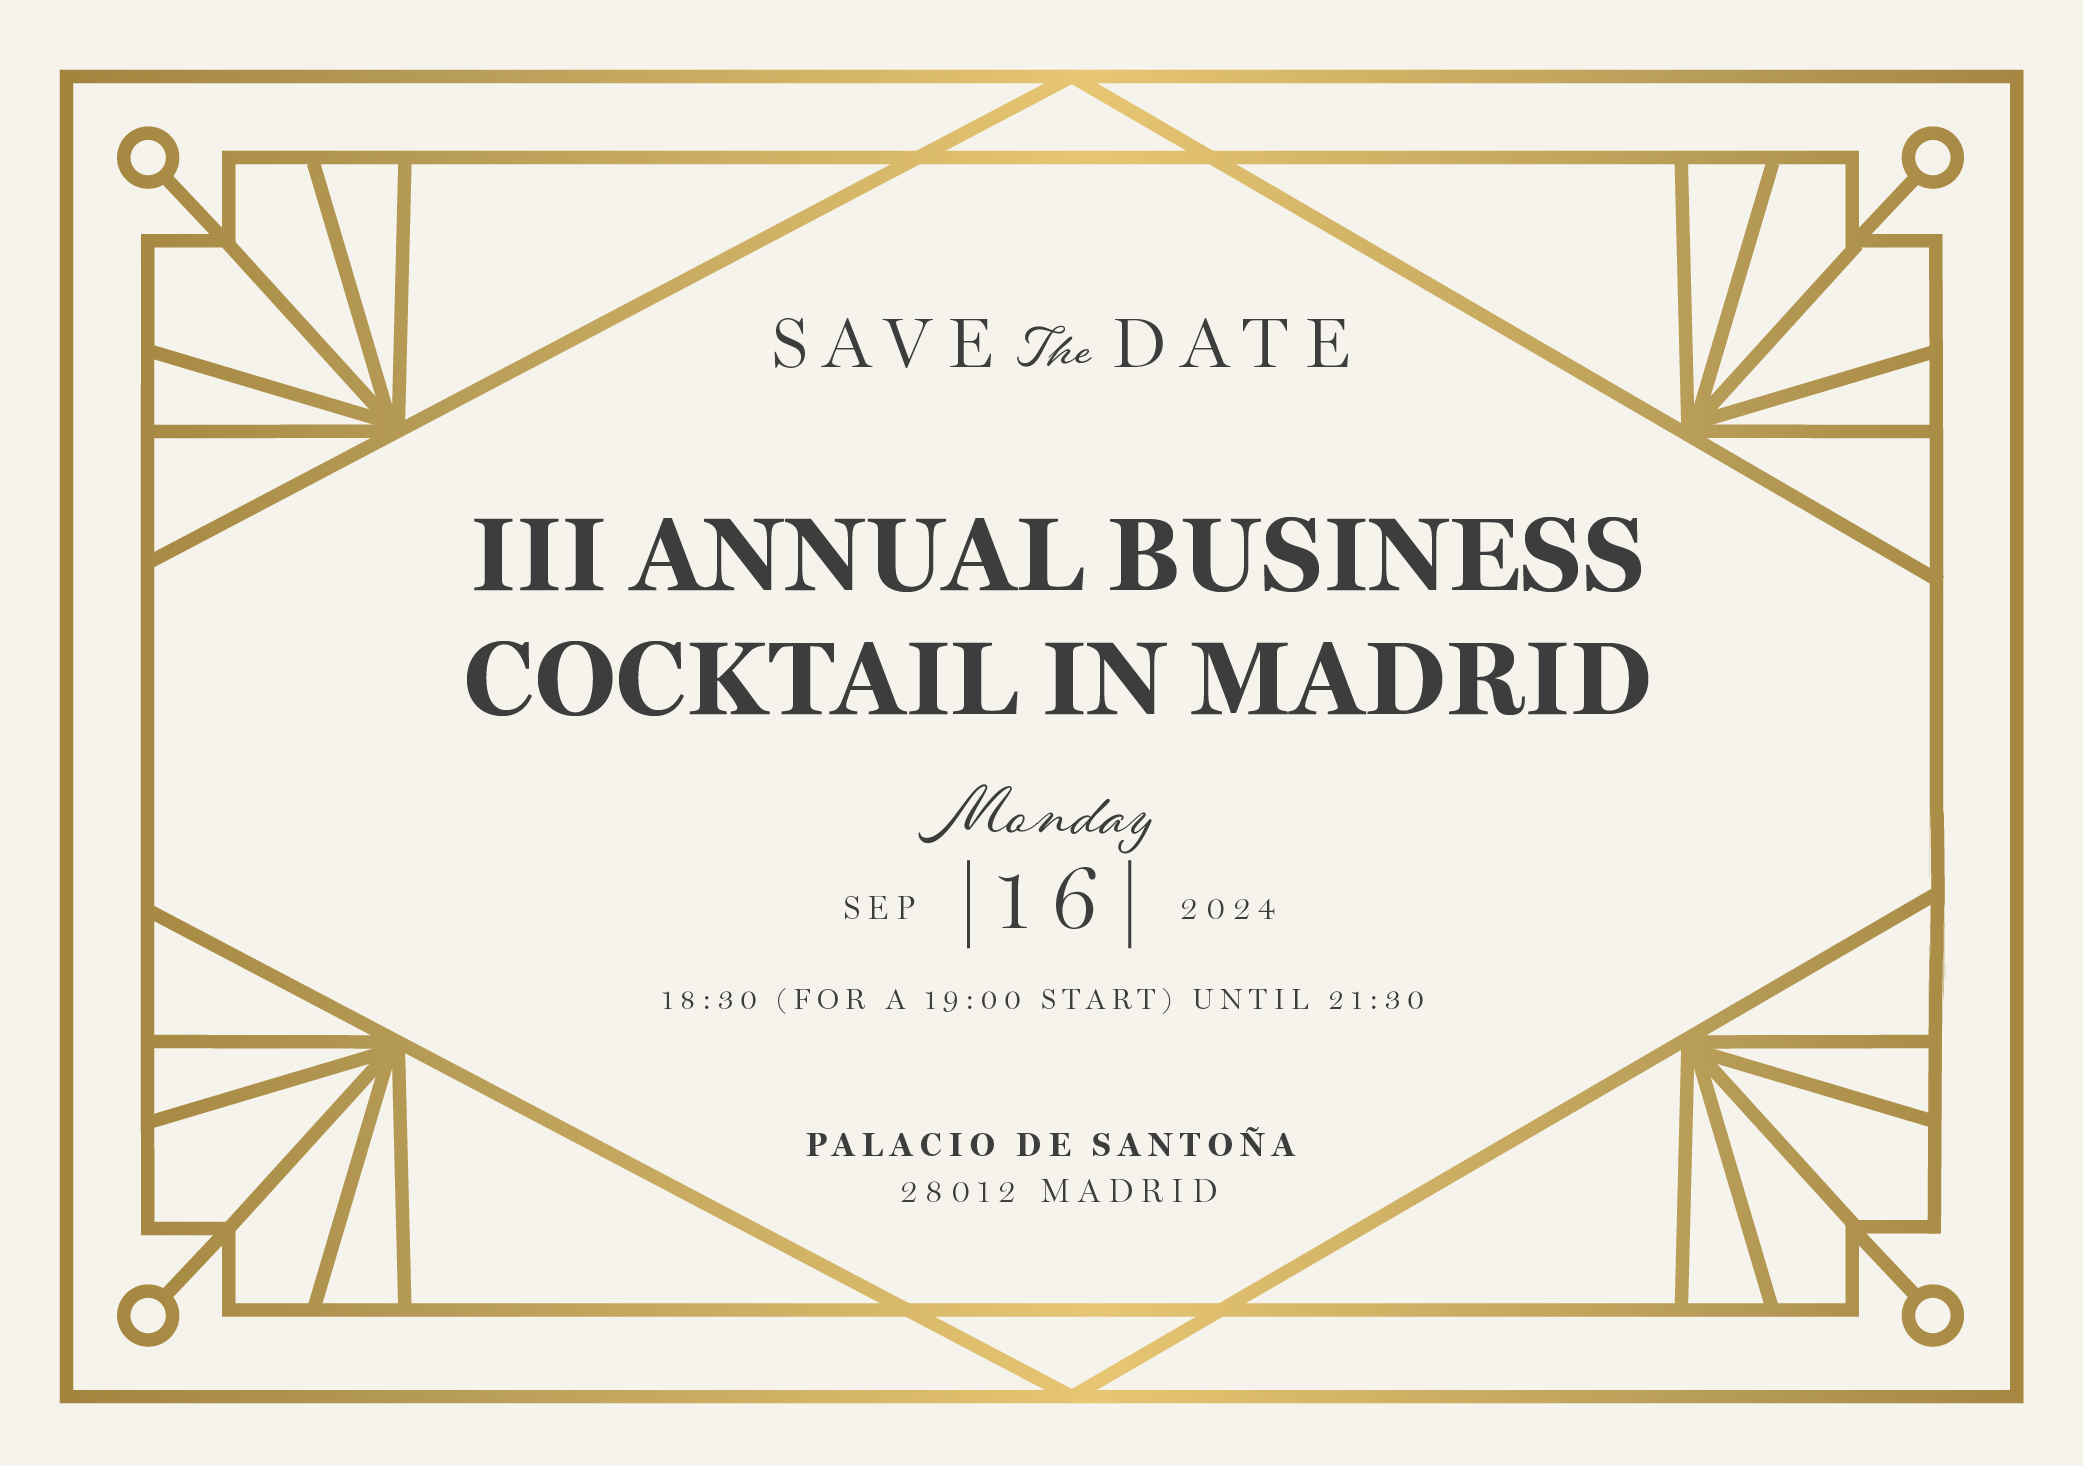 SAVE THE DATE | III ANNUAL BUSINESS COCKTAIL IN MADRID